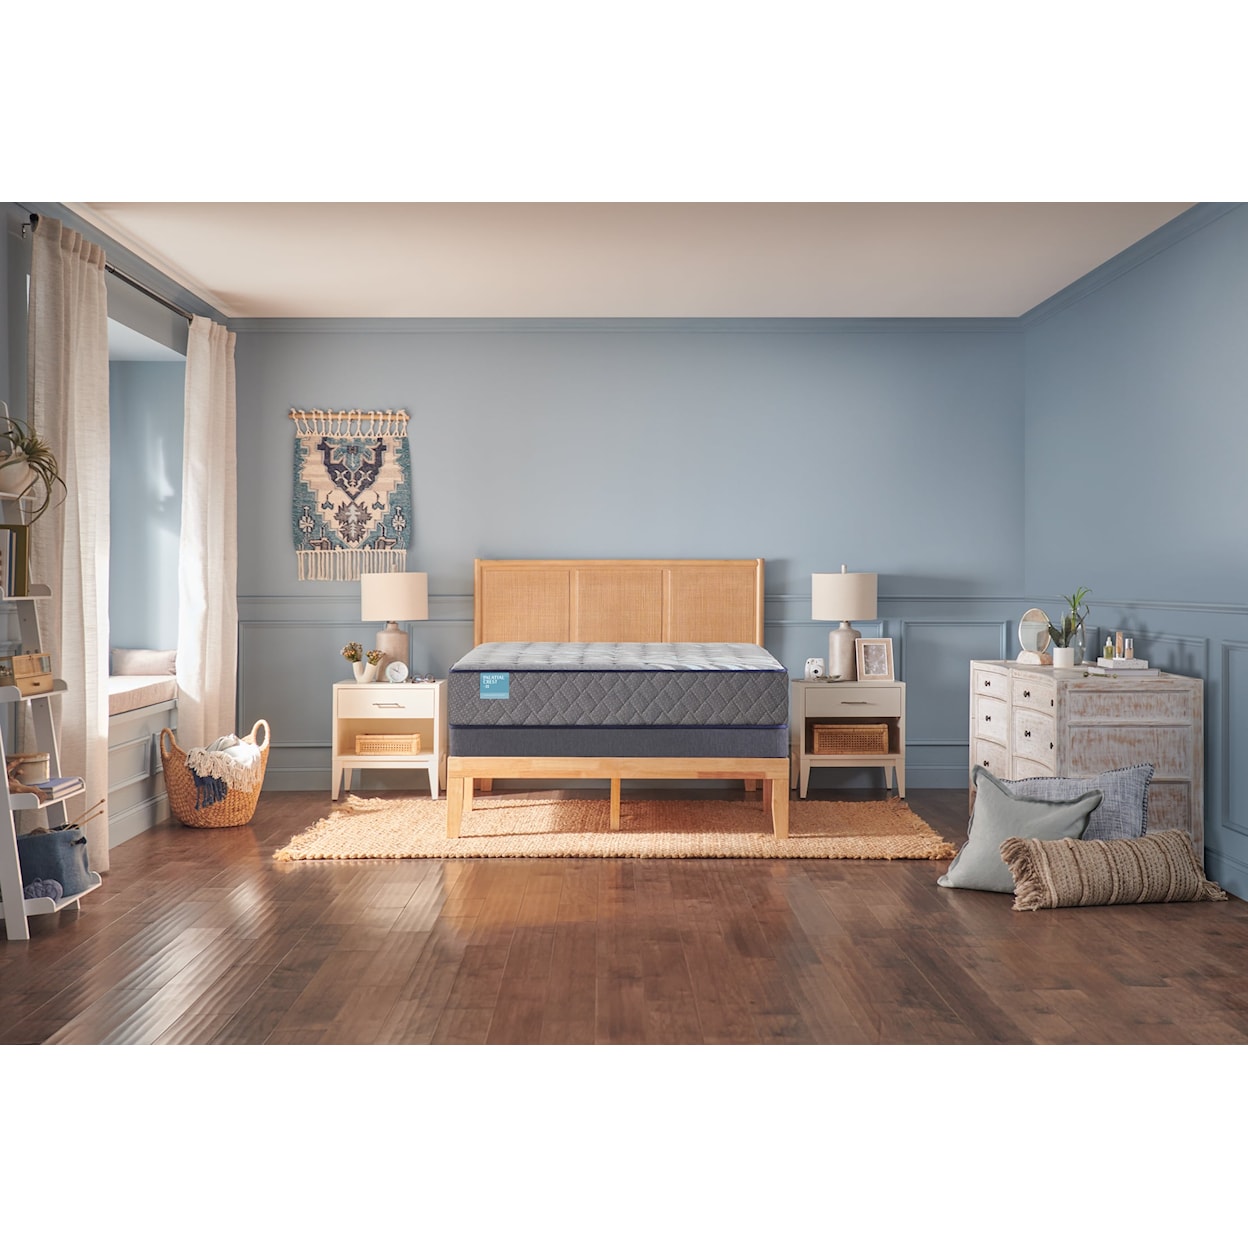 Sealy Palatial Crest S6 Cathedral Cove Firm TT Twin Long Mattress